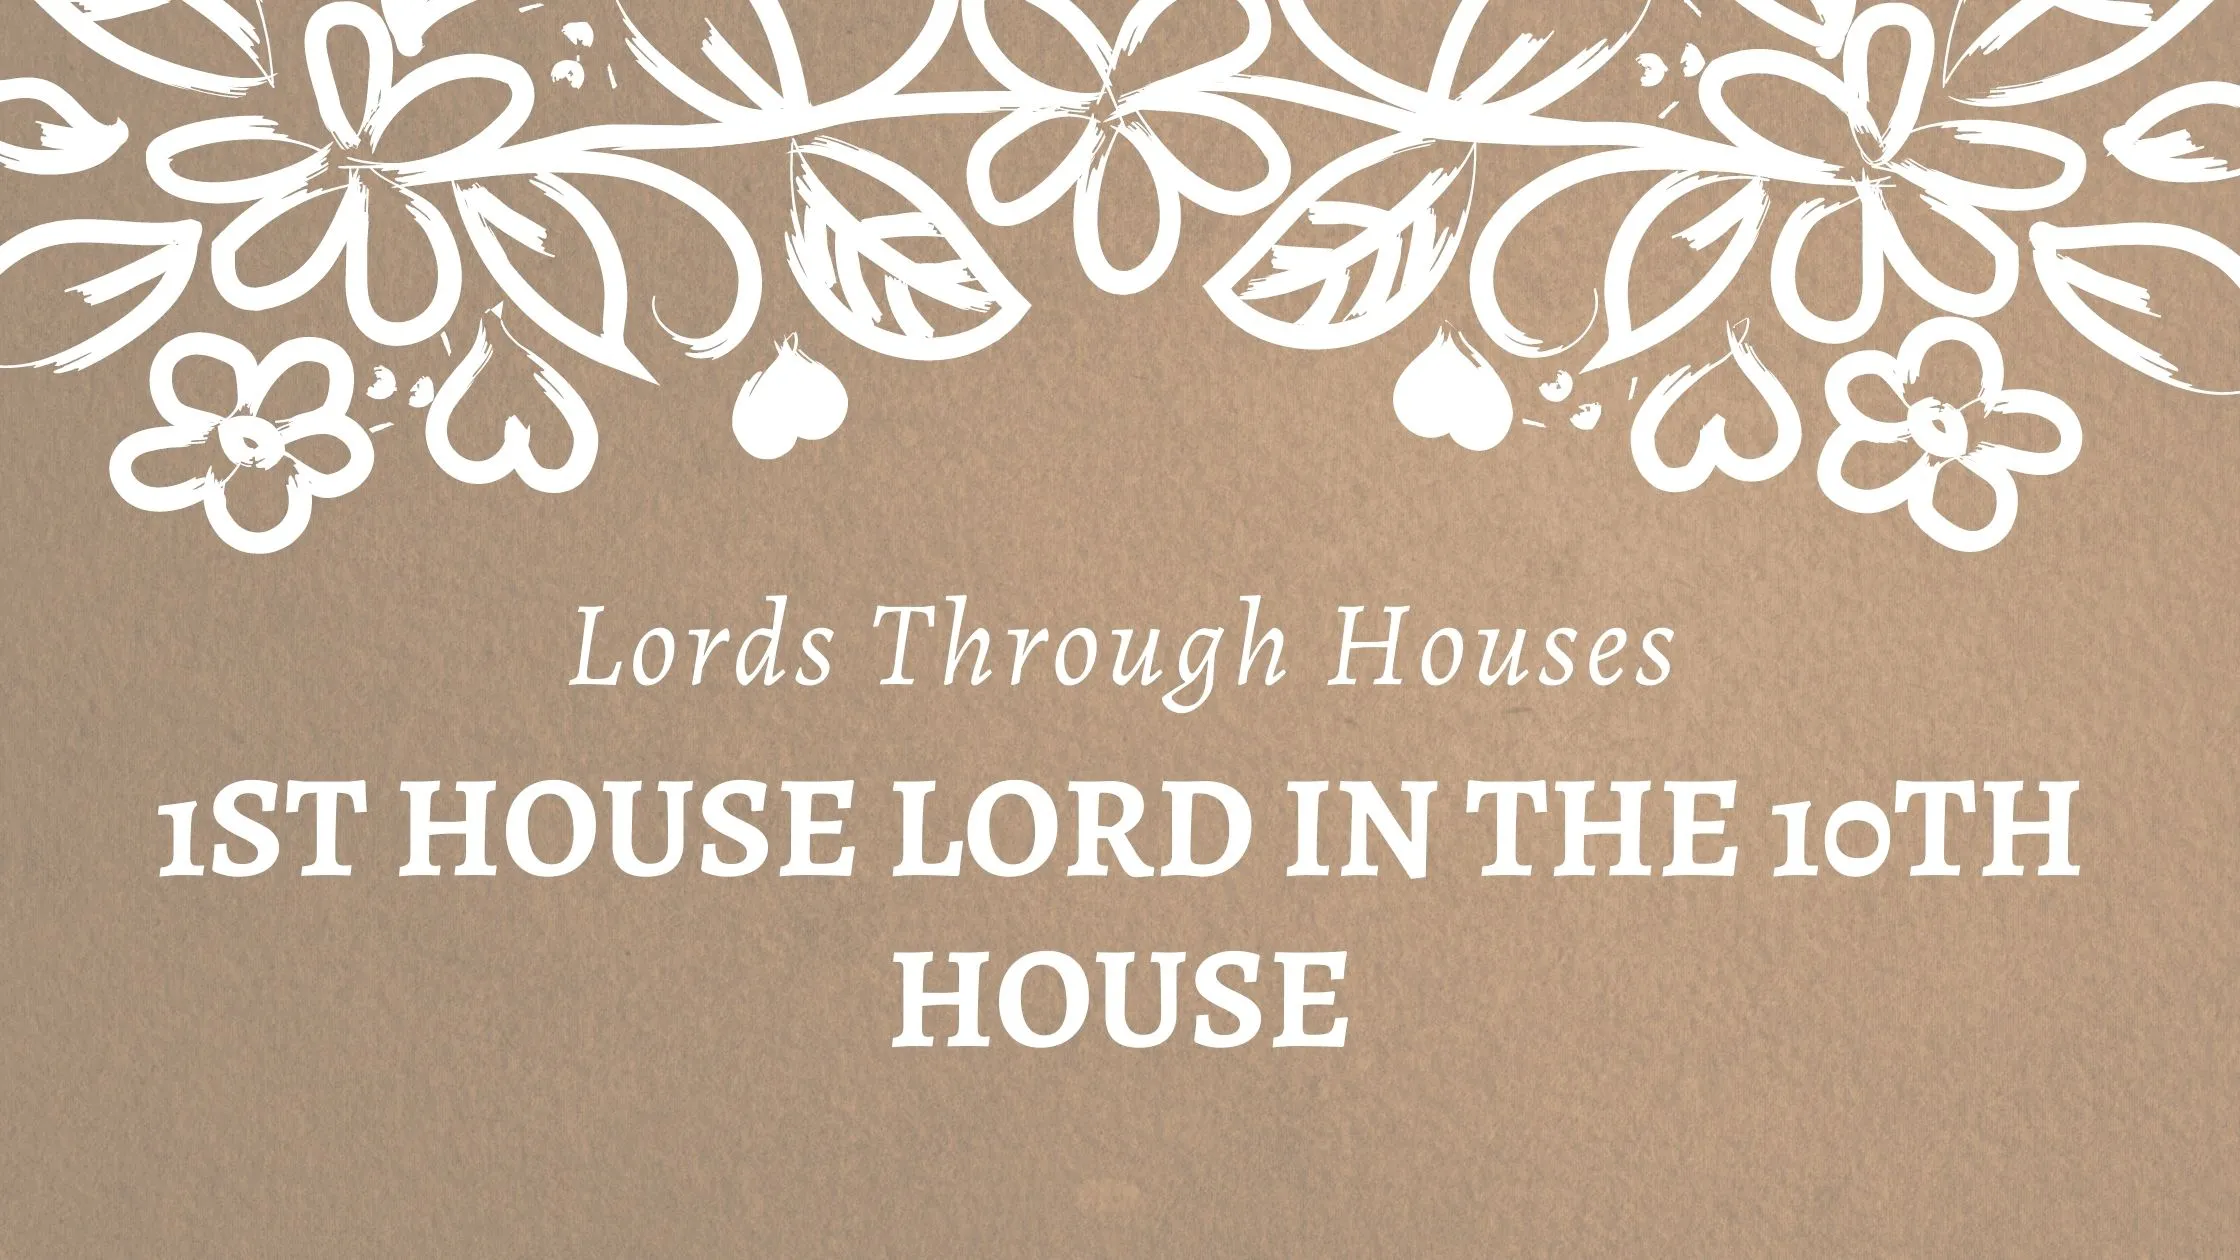 1st House Lord in the 10th House Lords though Houses